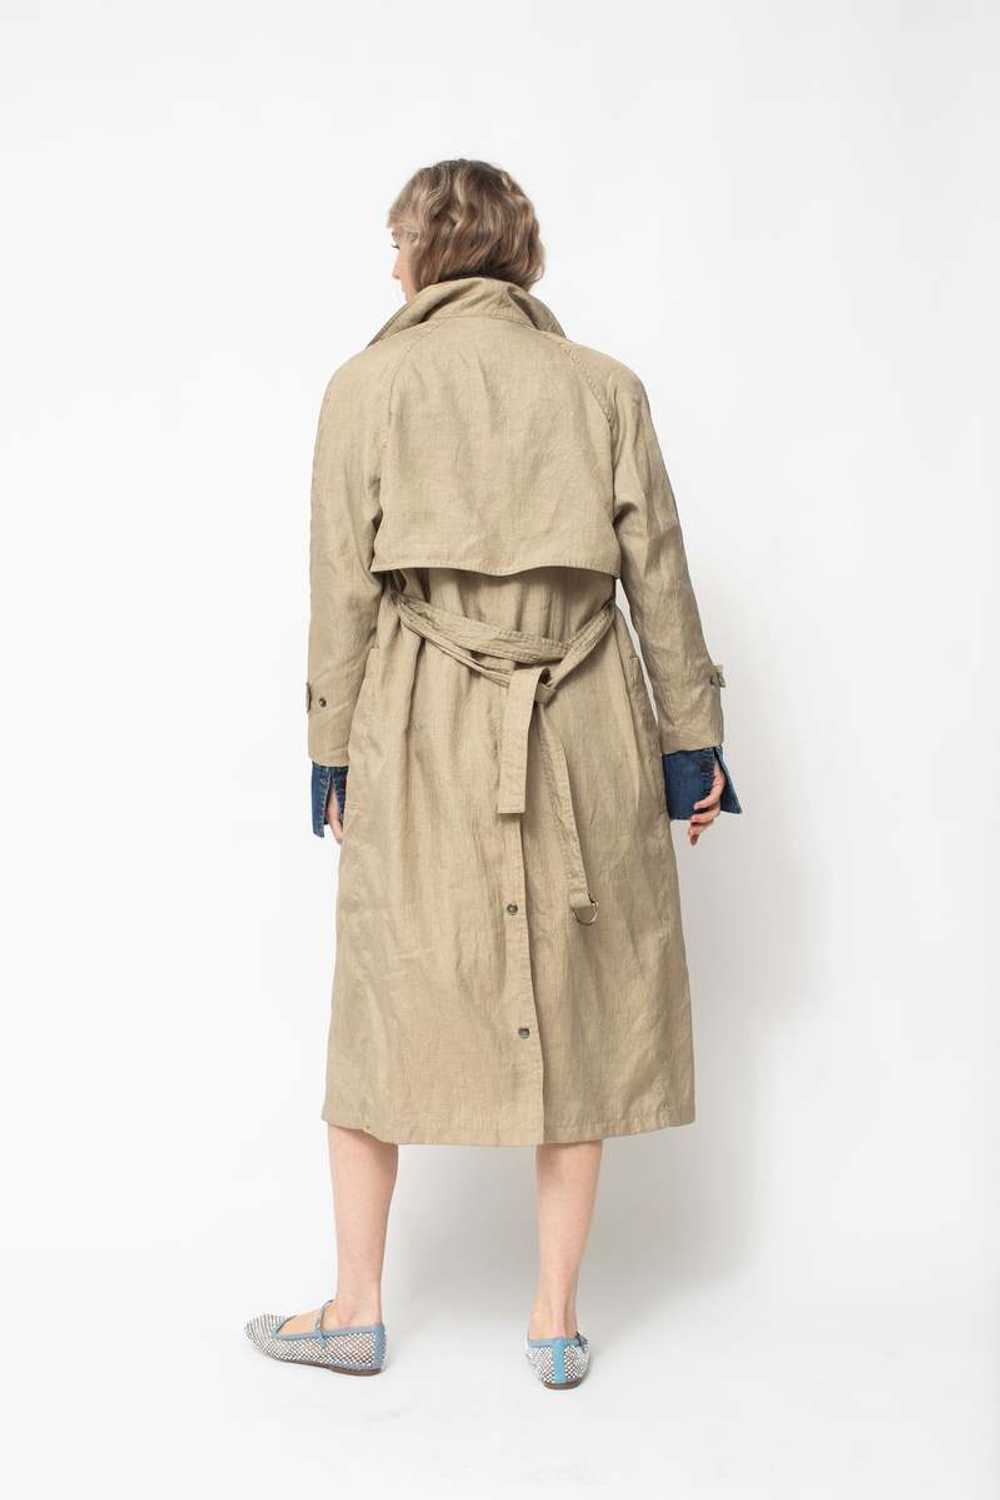 VINTAGE Lightweight Trench - Tan - image 4